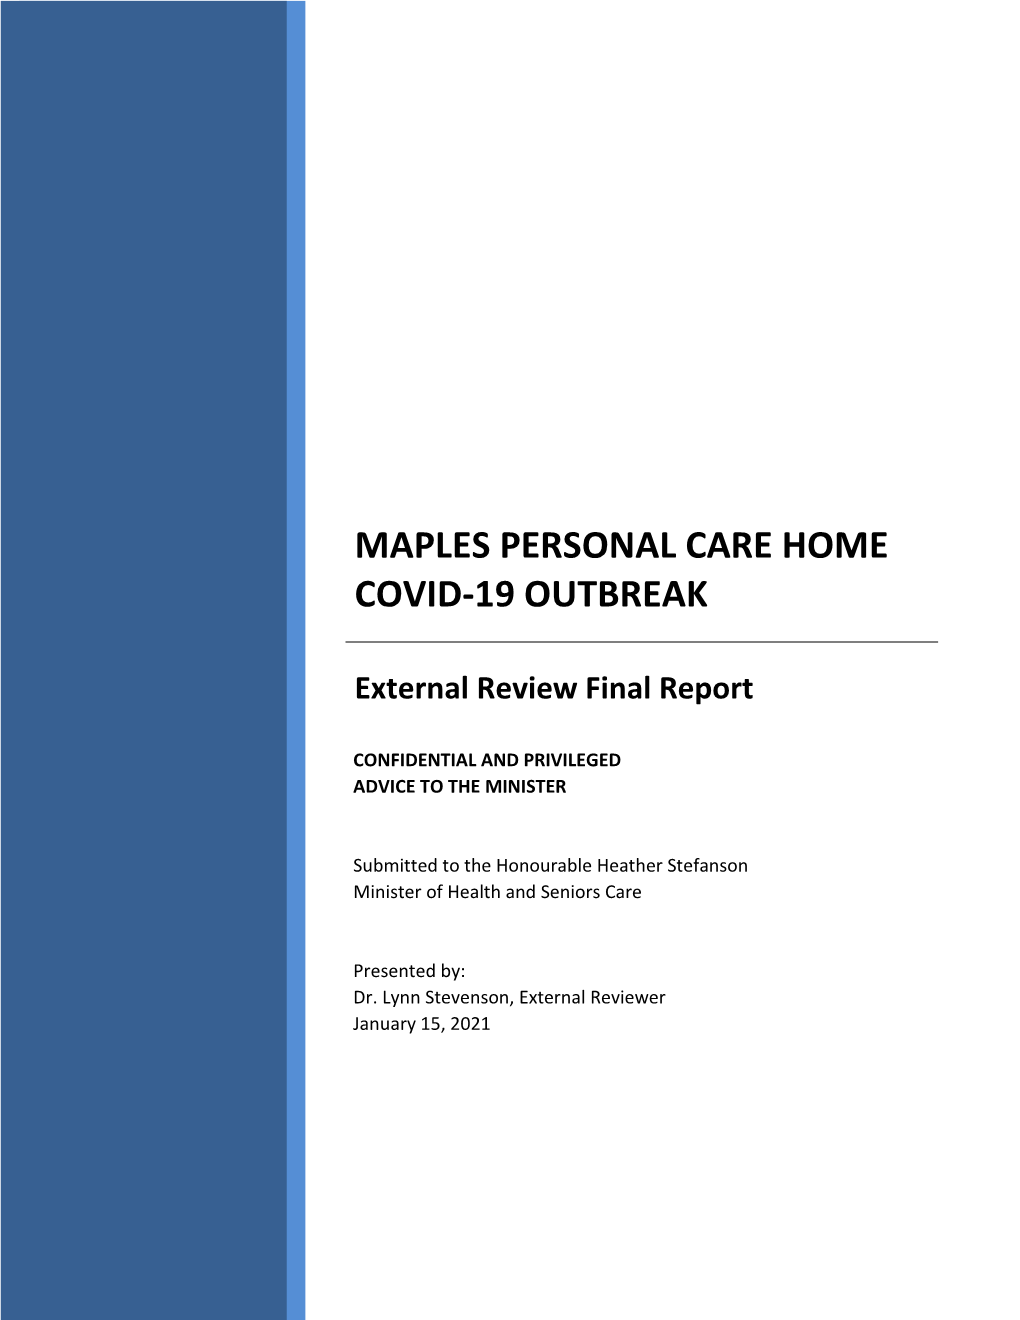 Maples Personal Care Home Covid-19 Outbreak